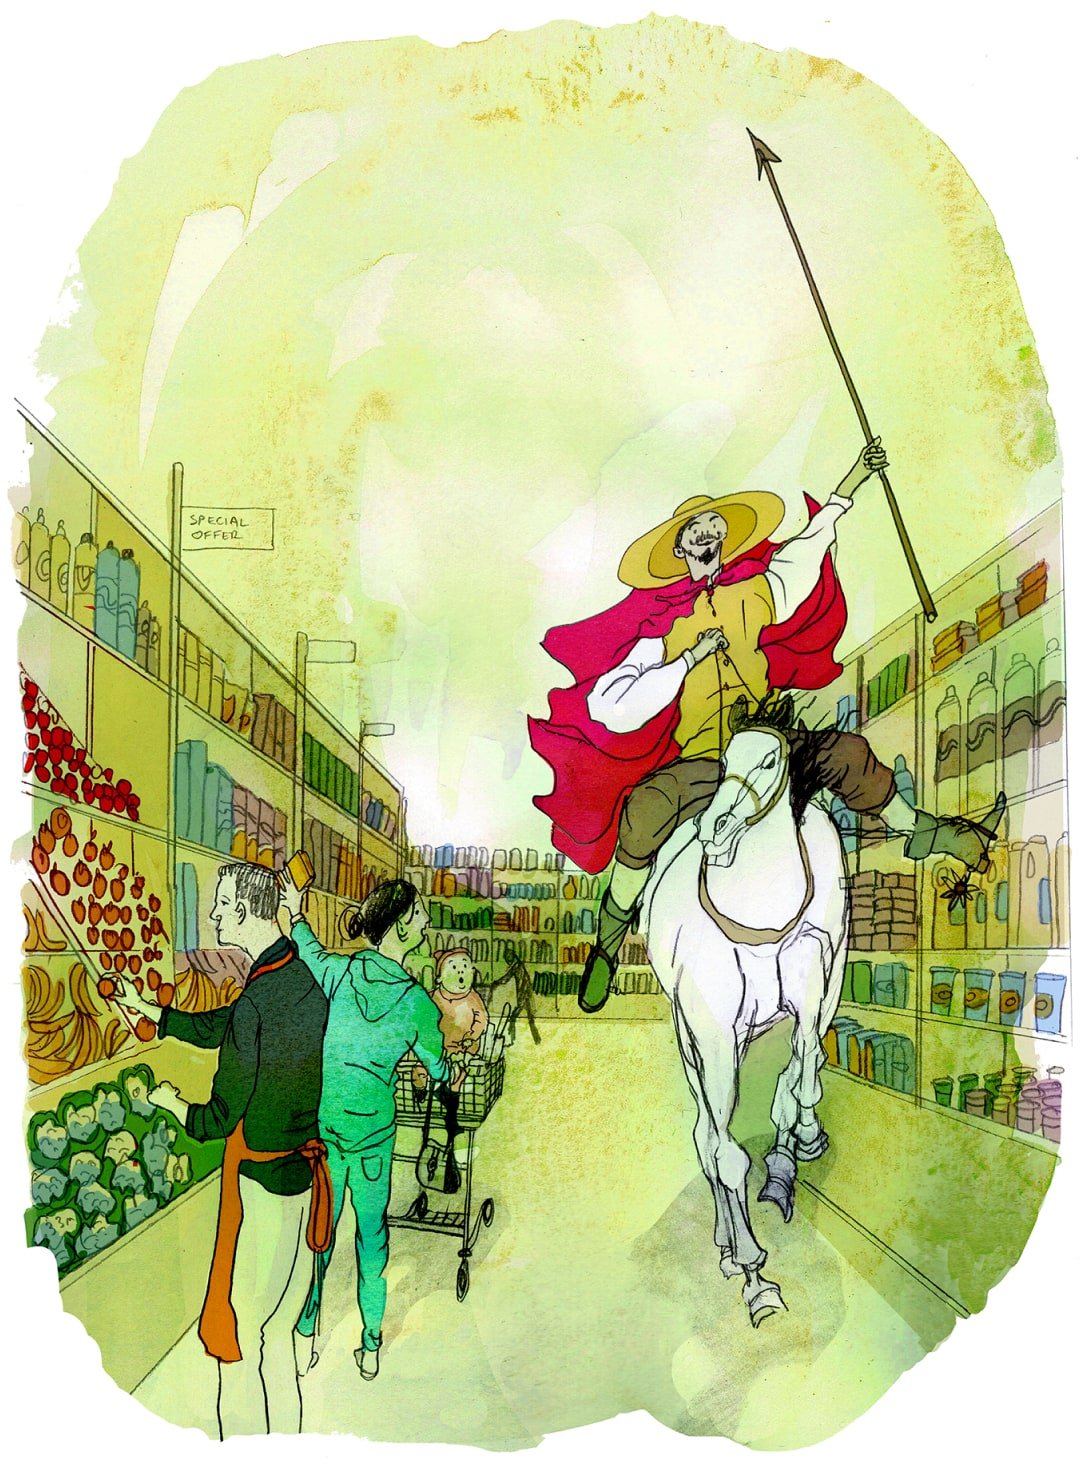 A man in a red cape holds a spear aloft and rides a horse through a supermarket ailse. I shocked baby looks on.